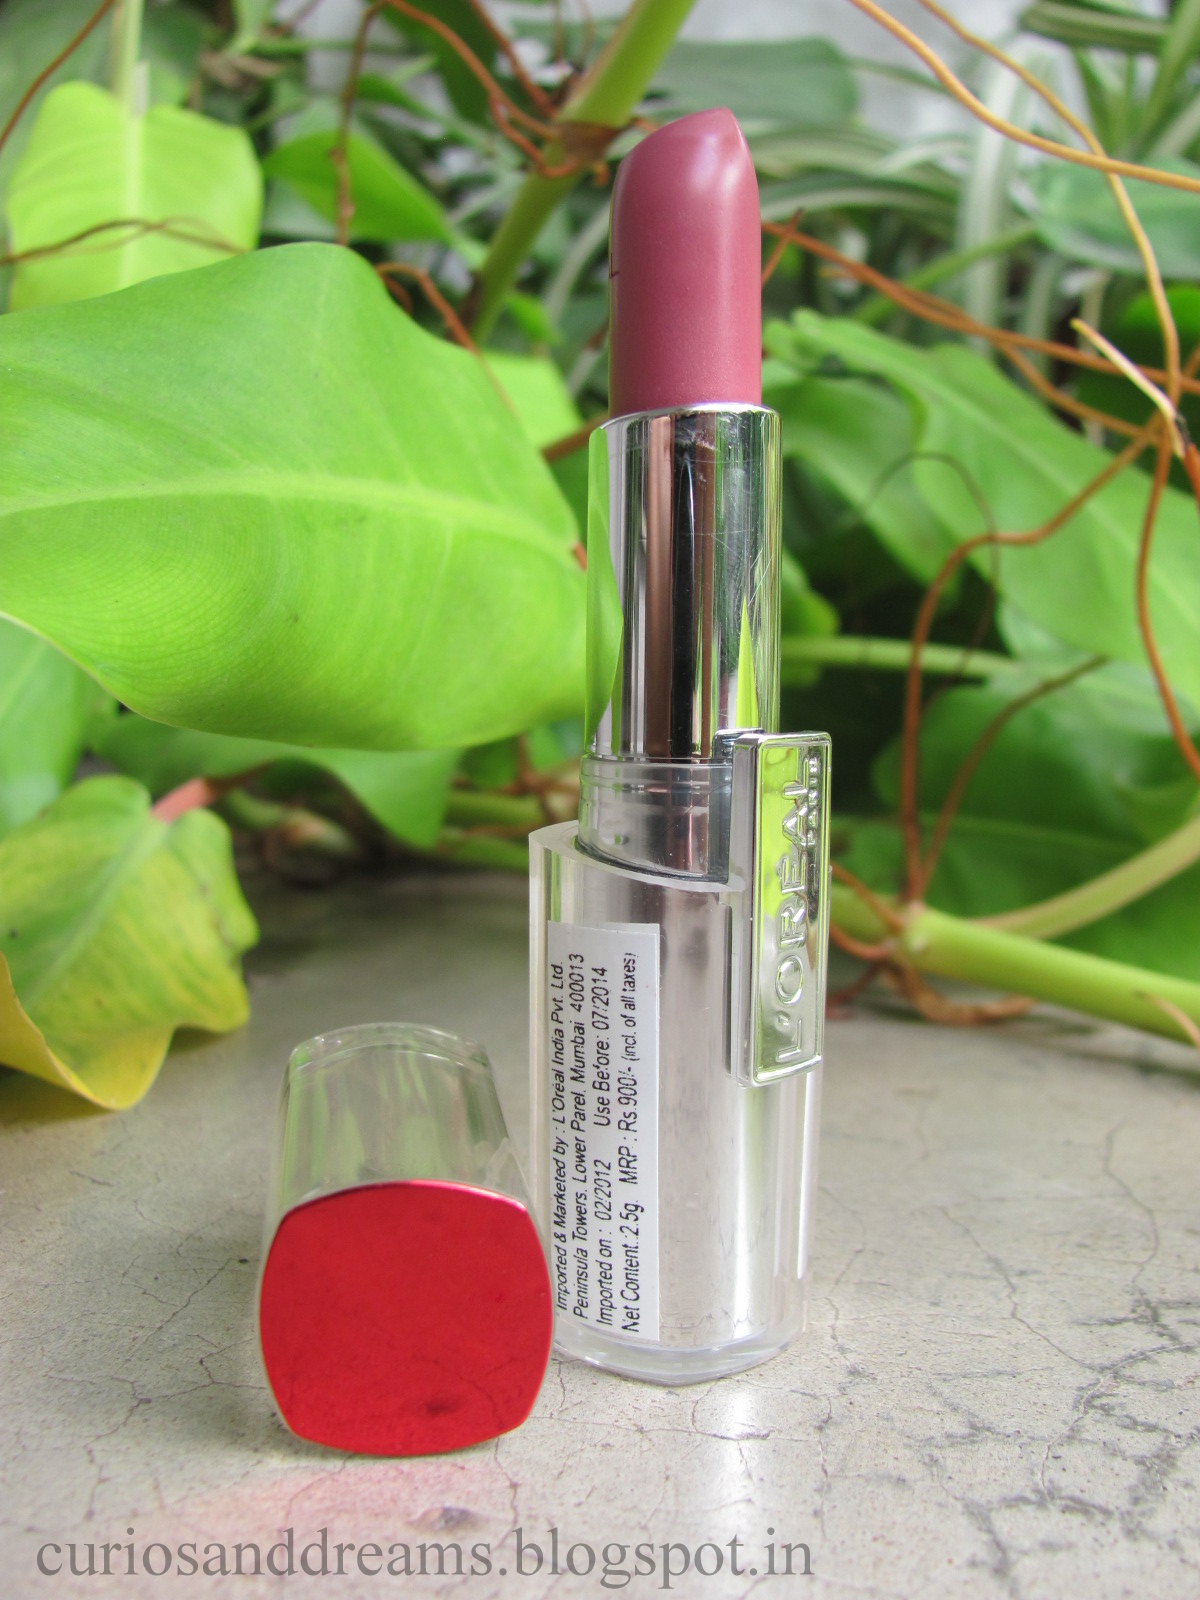 L'oreal Infallible Le Rouge Lipstick in Tender Berry, L'oreal Infallible Le Rouge Lipstick, L'oreal Infallible Lipstick in Tender Berry, L'oreal Infallible Tender Berry, L'oreal Infallible Lipsticks